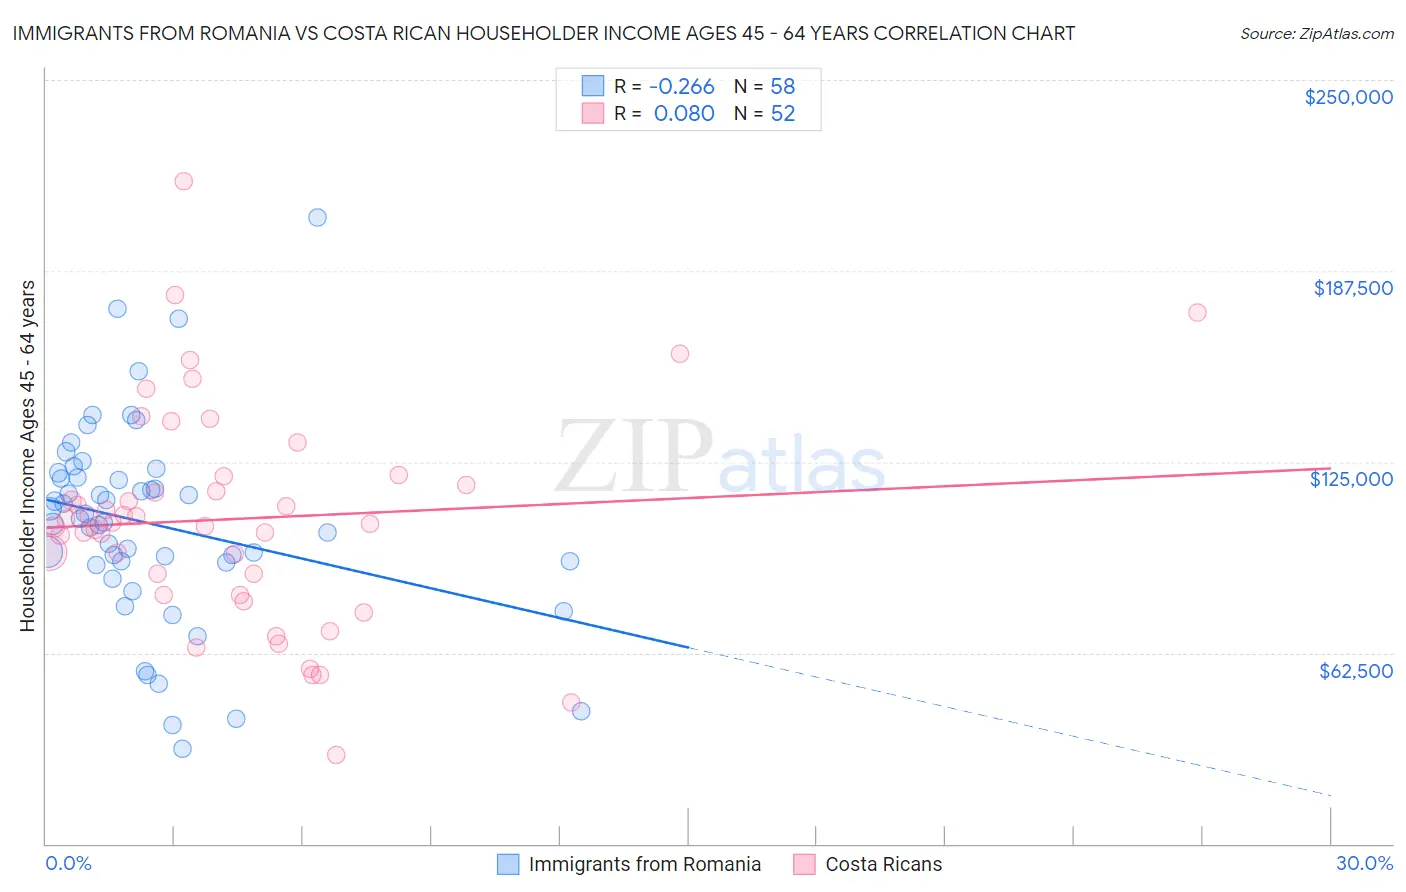 Immigrants from Romania vs Costa Rican Householder Income Ages 45 - 64 years